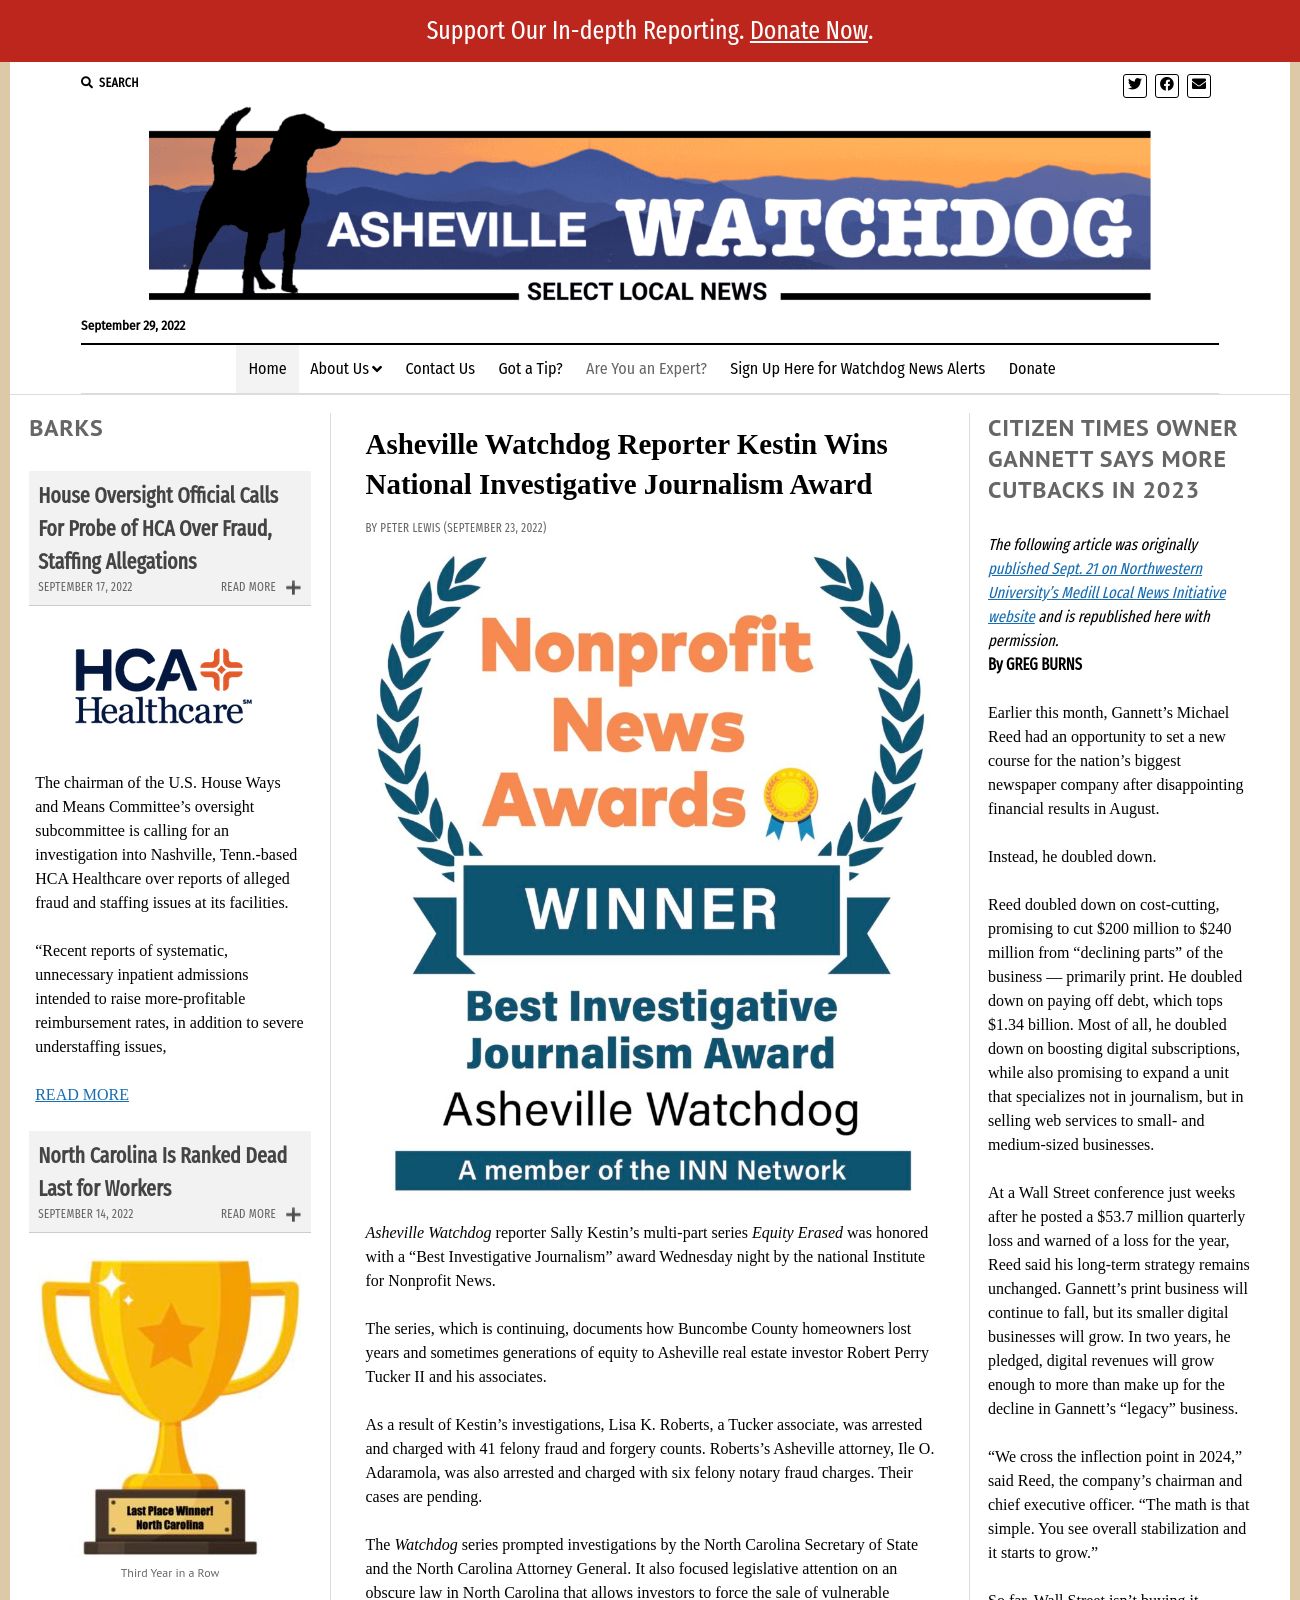 Asheville Watchdog at 2022-09-29 06:53:07-04:00 local time